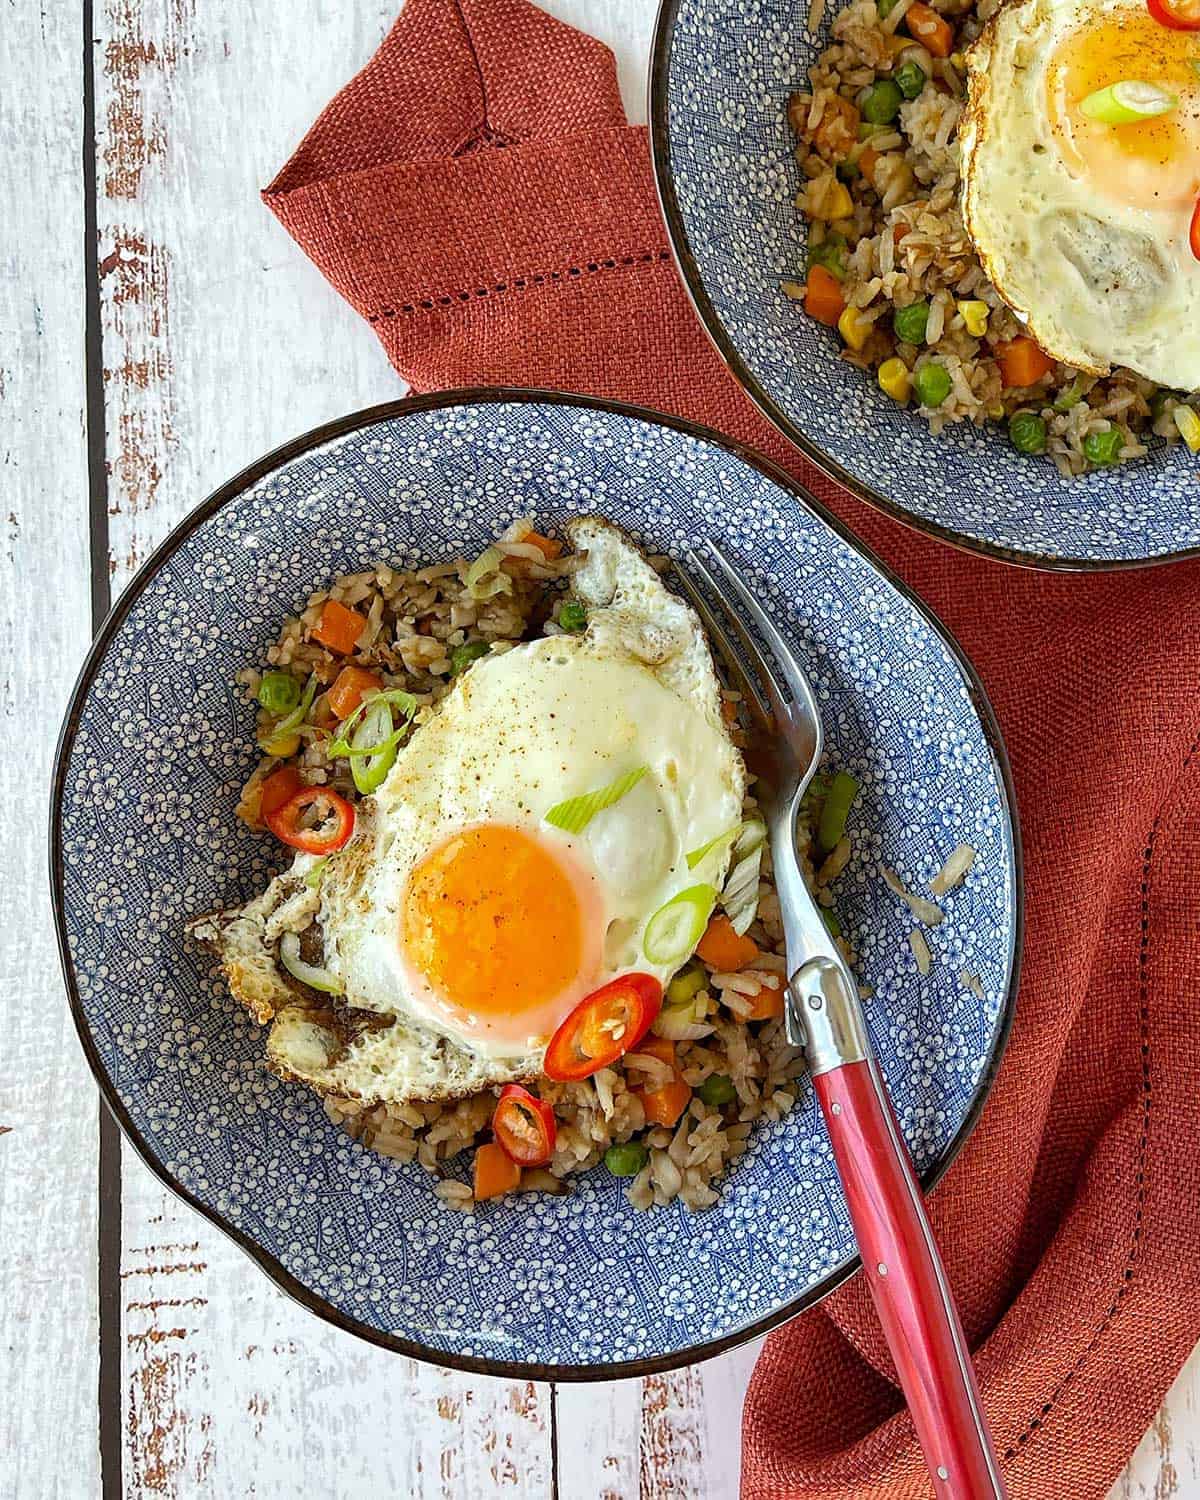 A bowl of Mushroom Fried Rice with a Fried Egg on top.